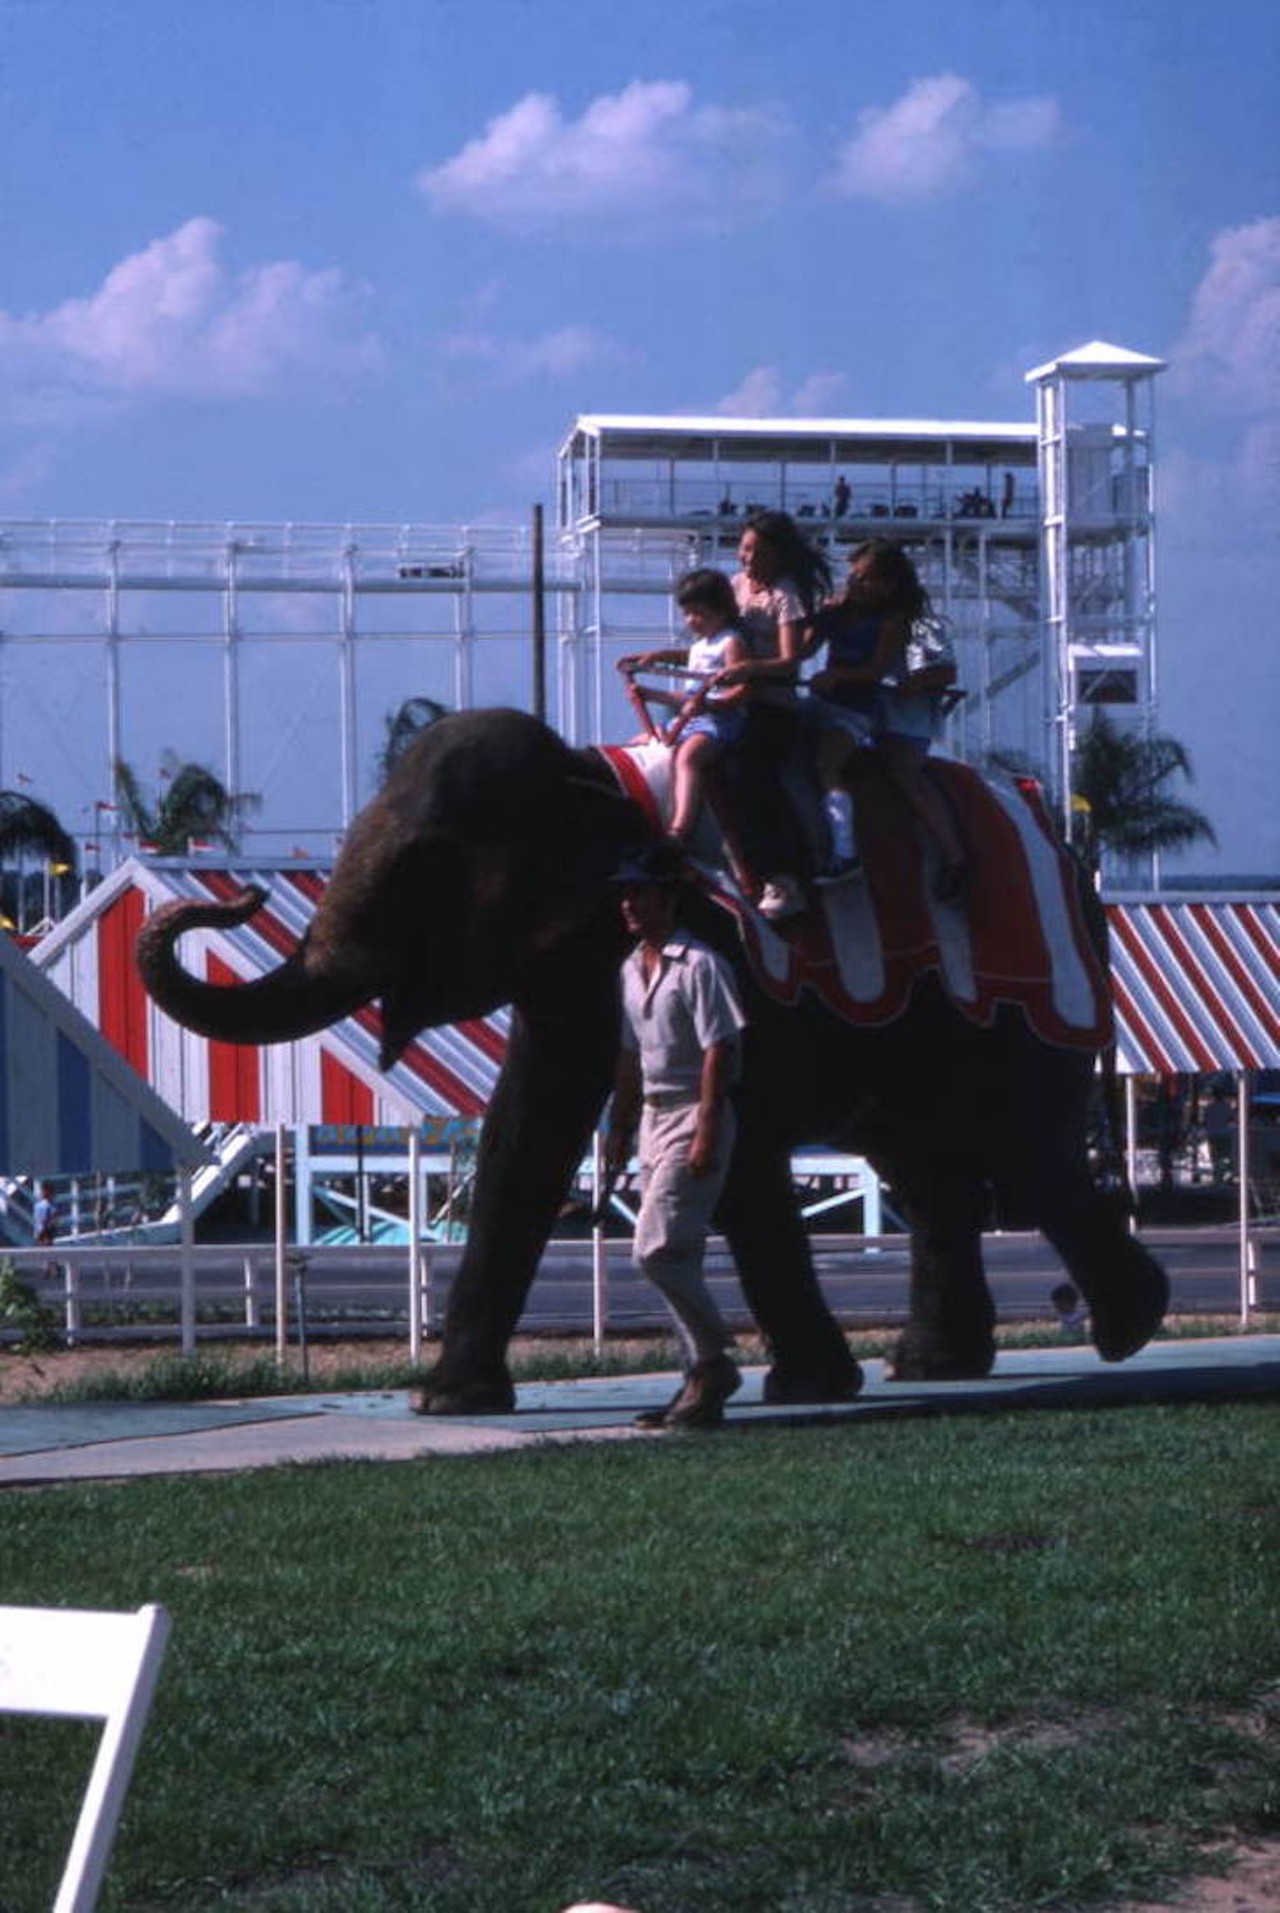 Let's remember the shuttered Orlando theme park Circus World